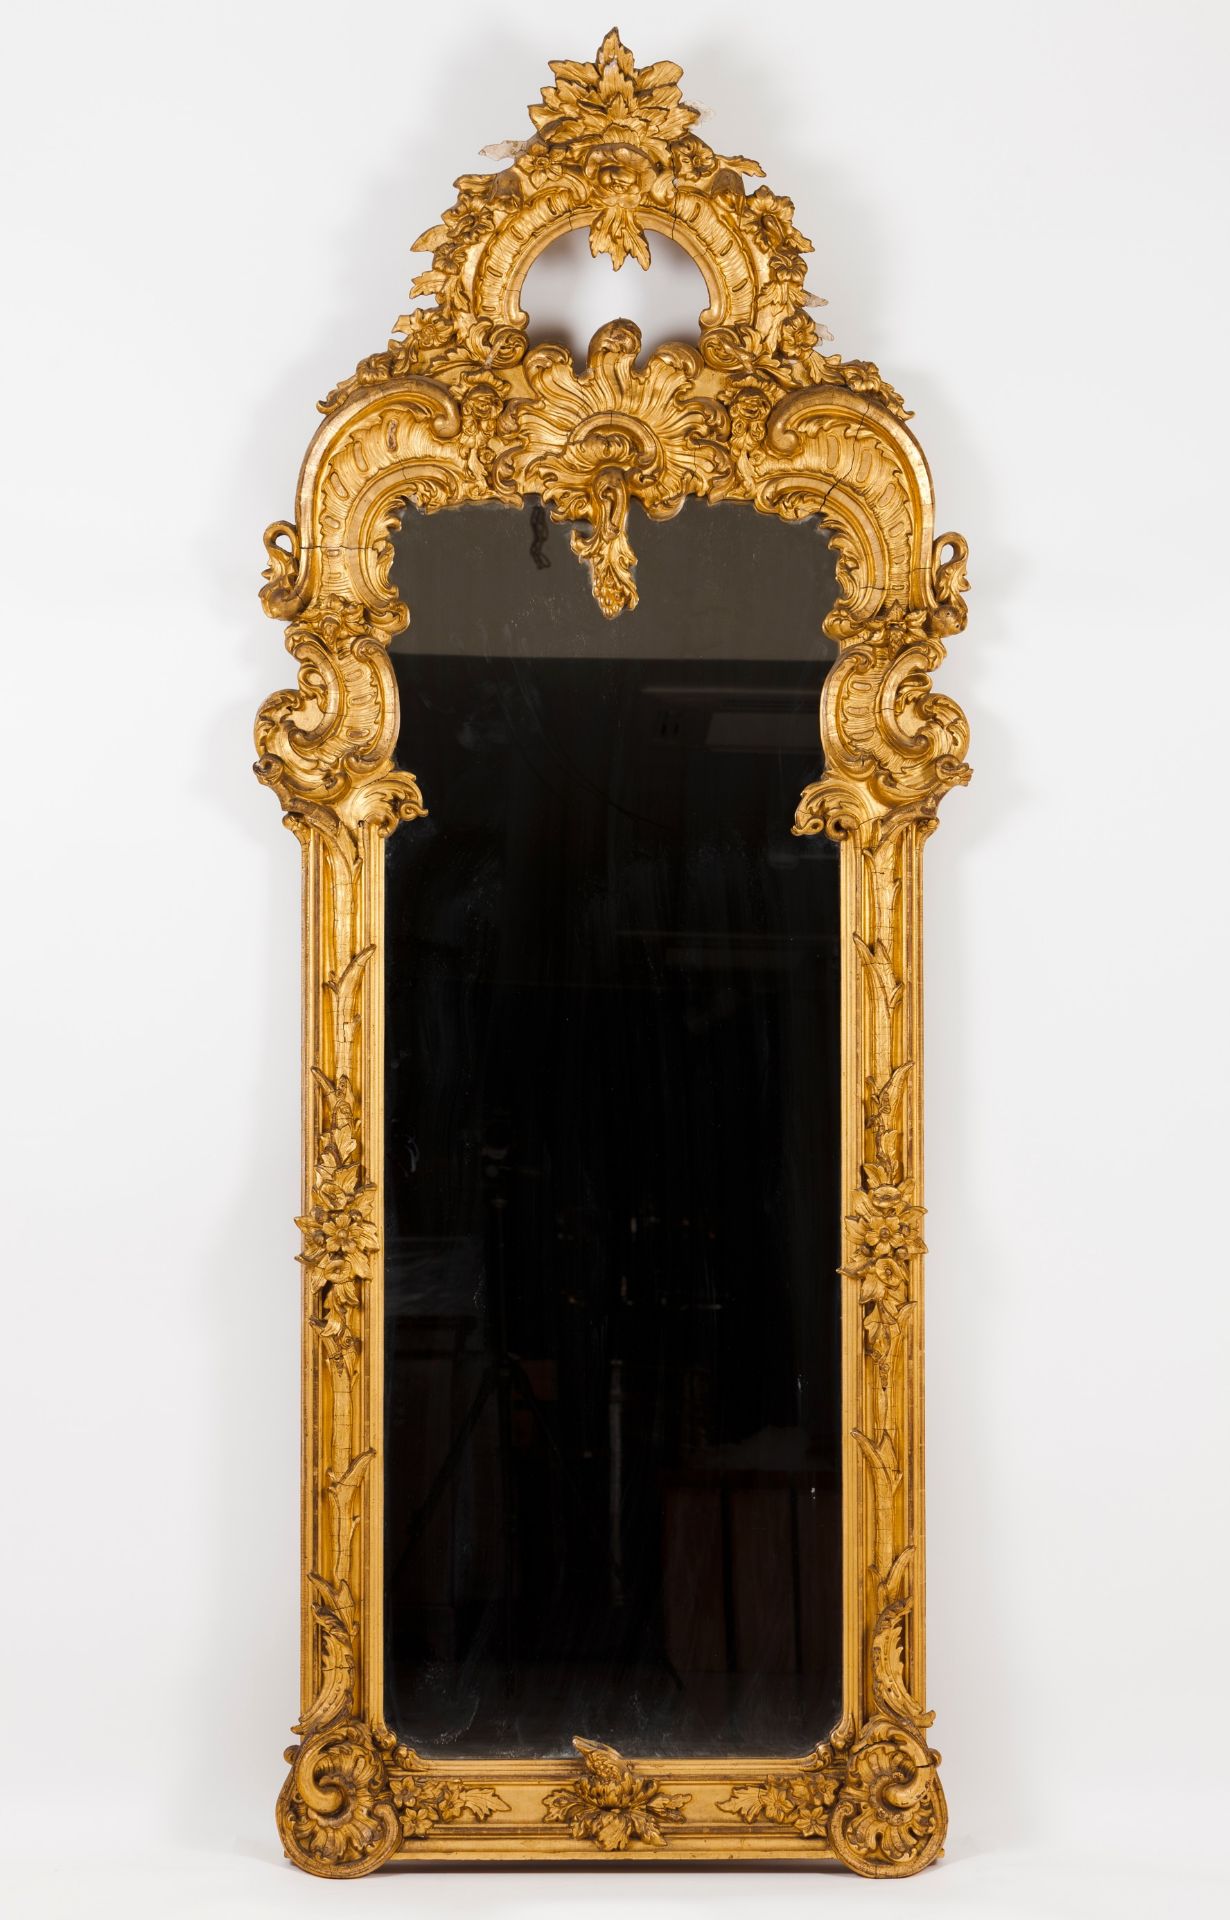 A pair of large mirrors